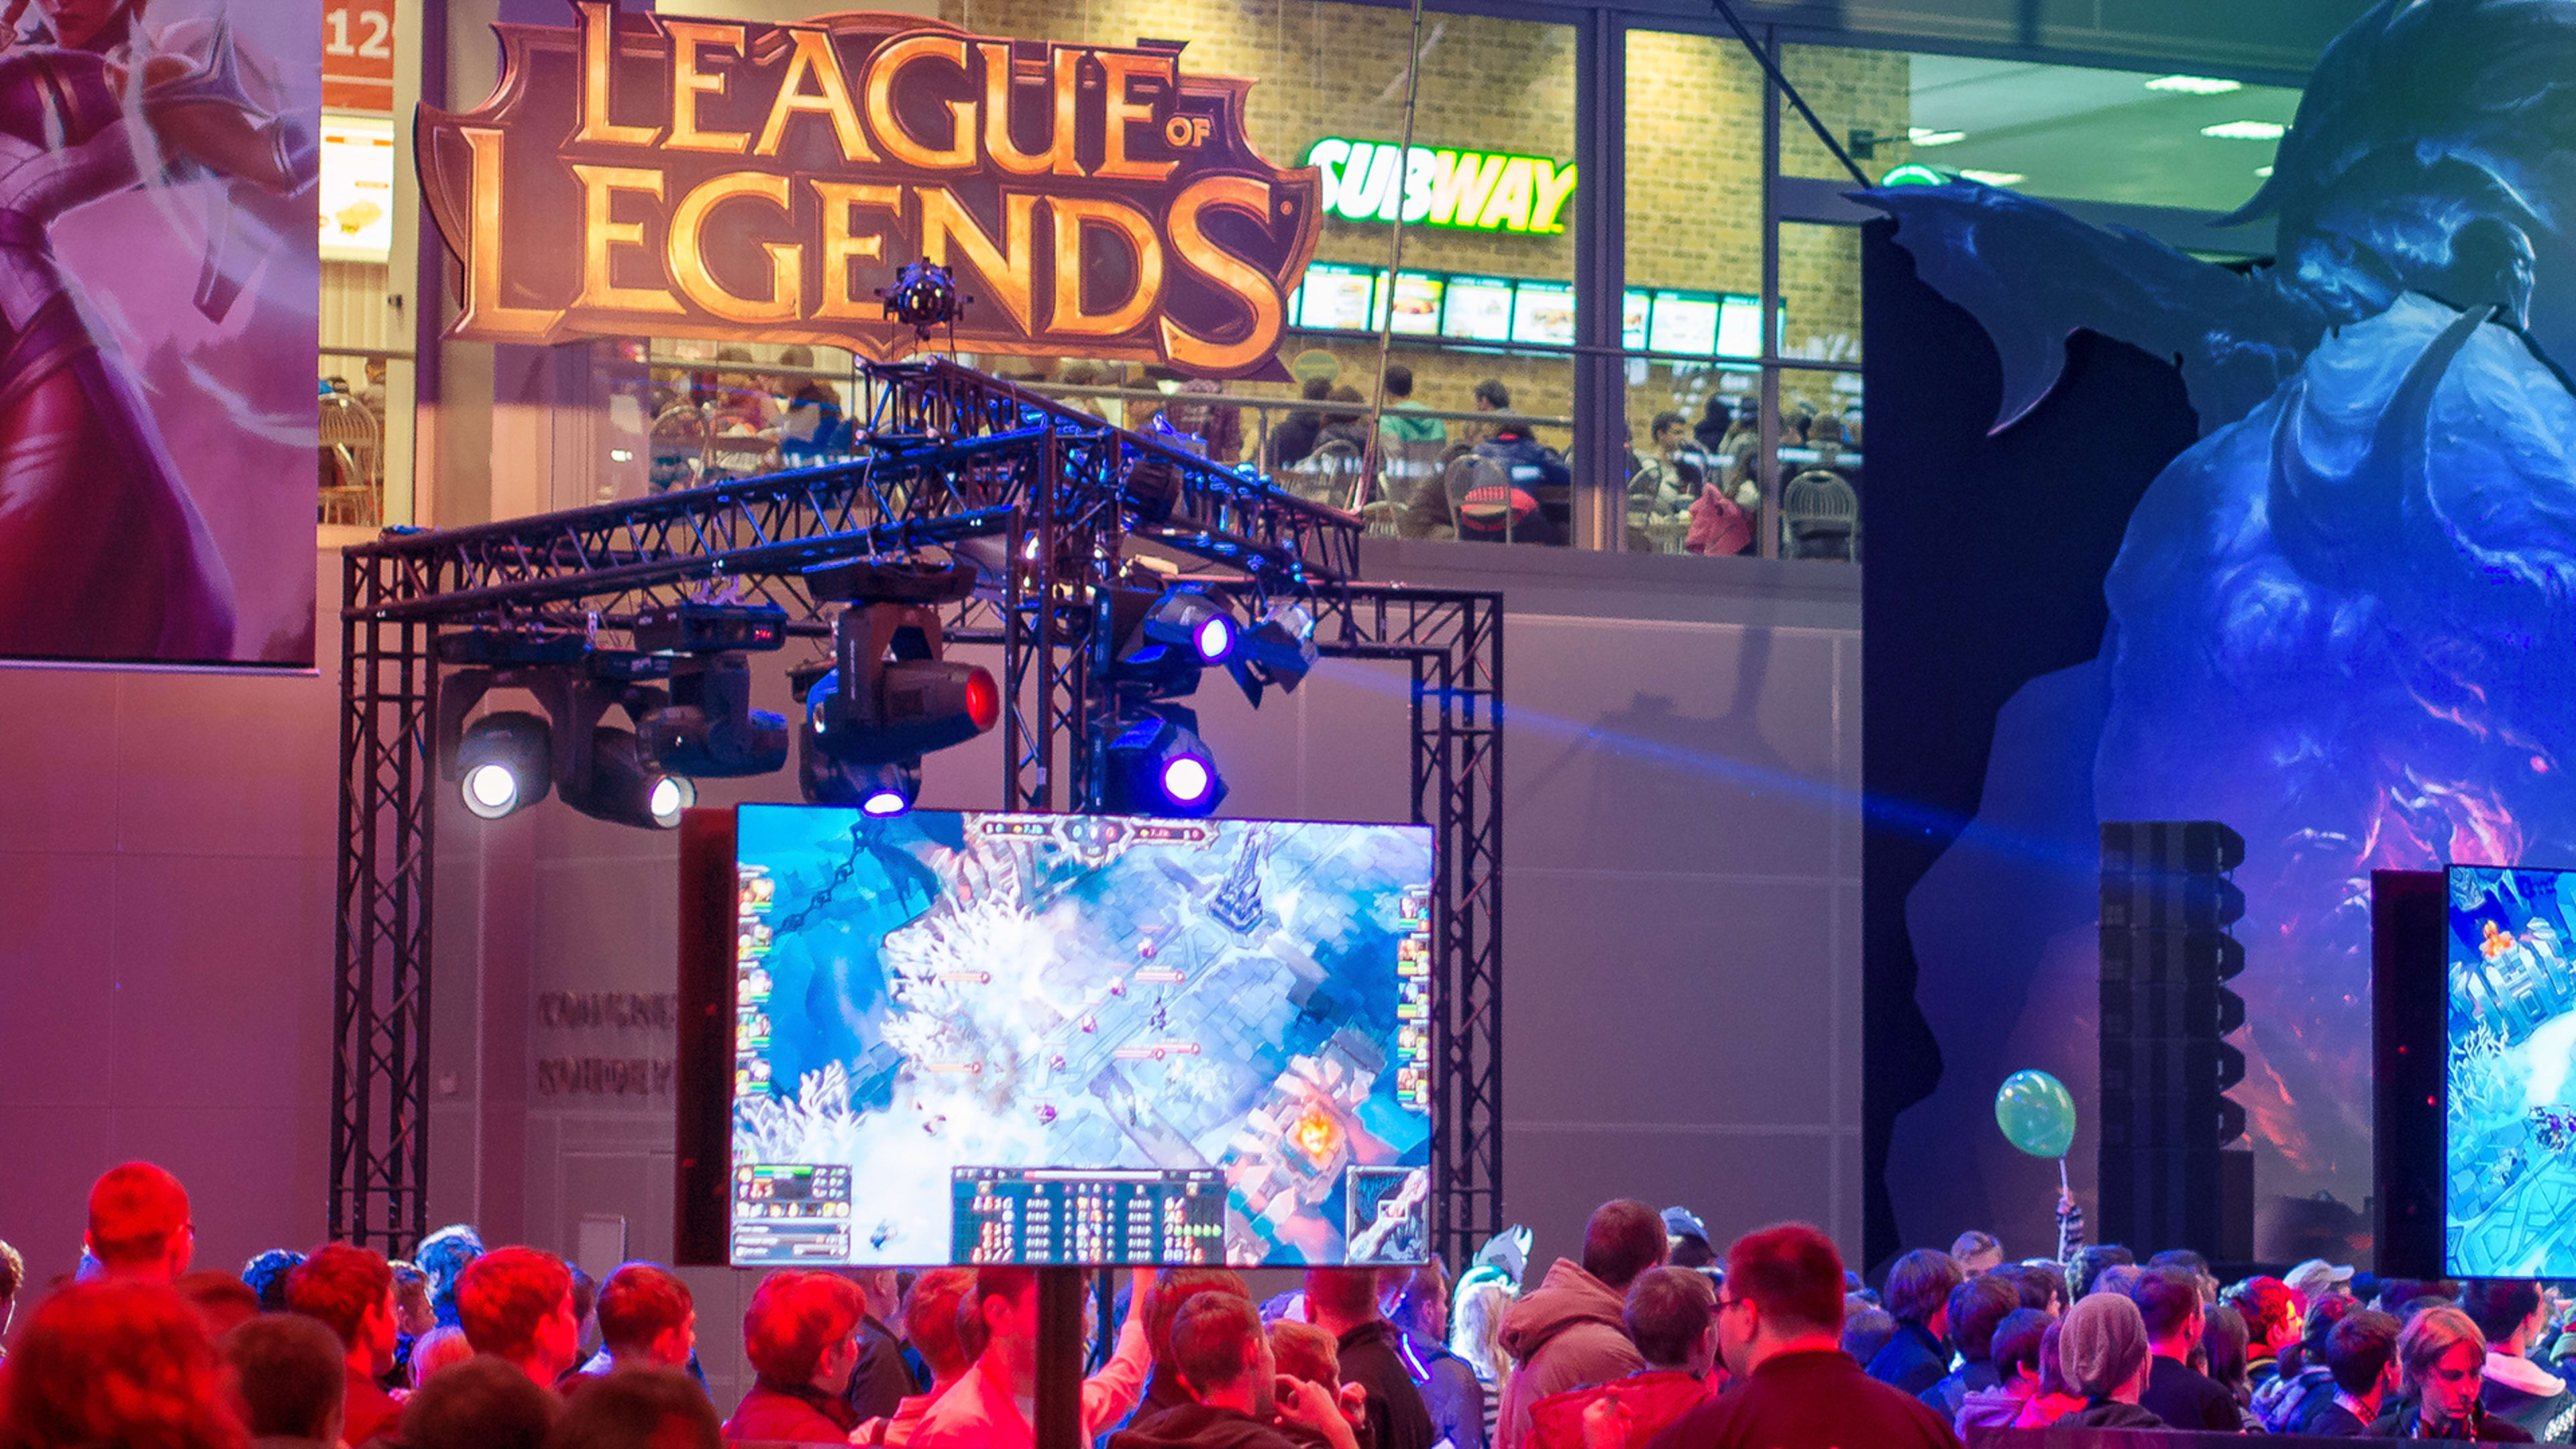 Why Mastercard signed on as League of Legends’ first-ever global sponsor